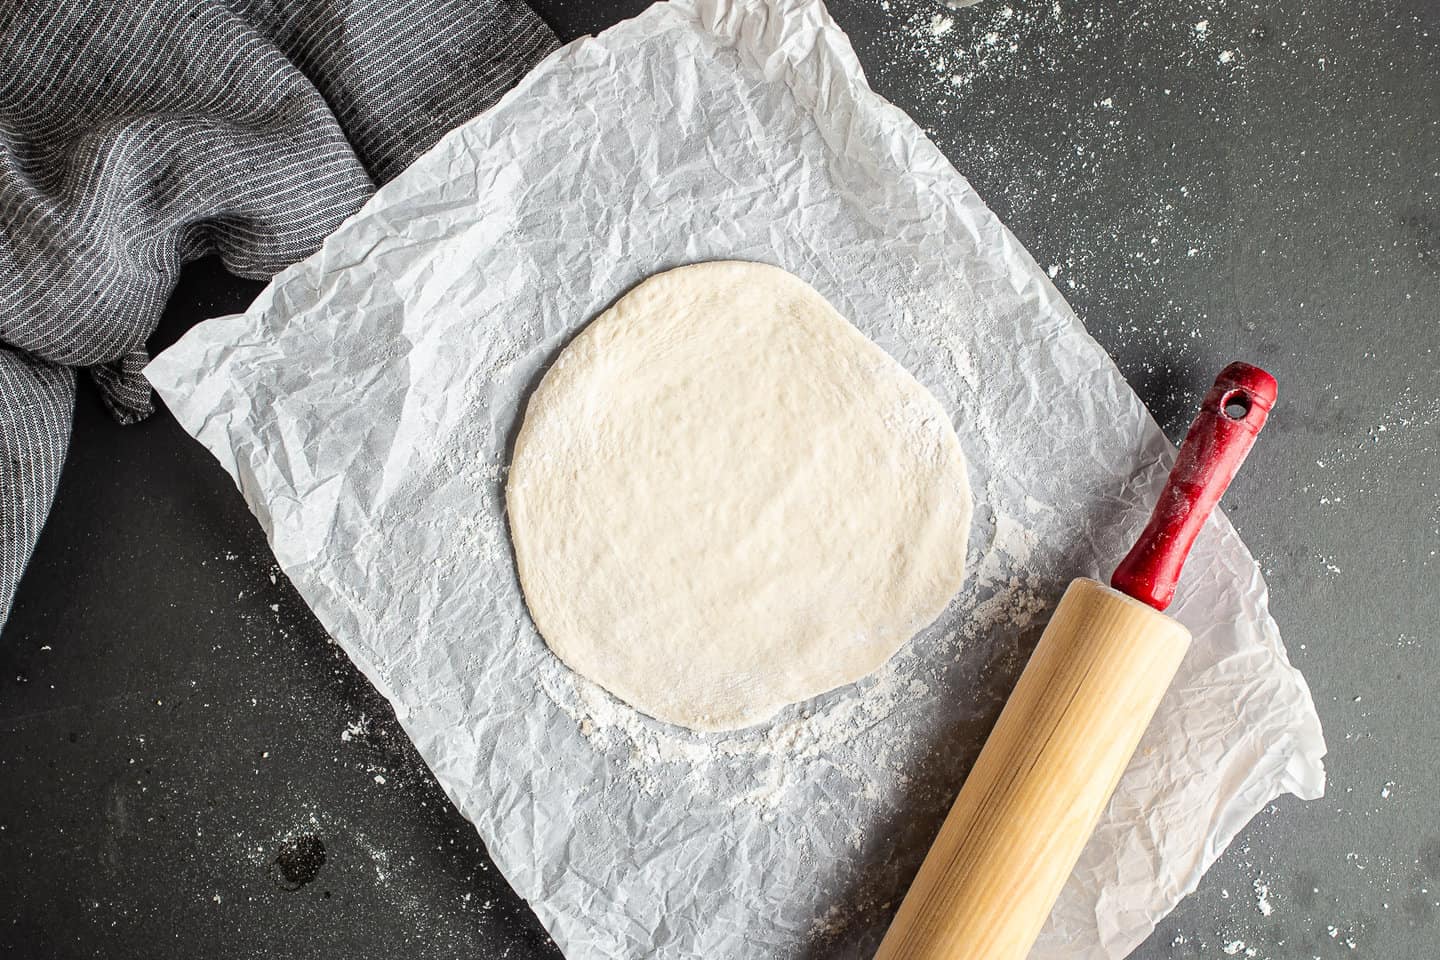 Rolling pita bread dough into flat circles with a rolling pin.